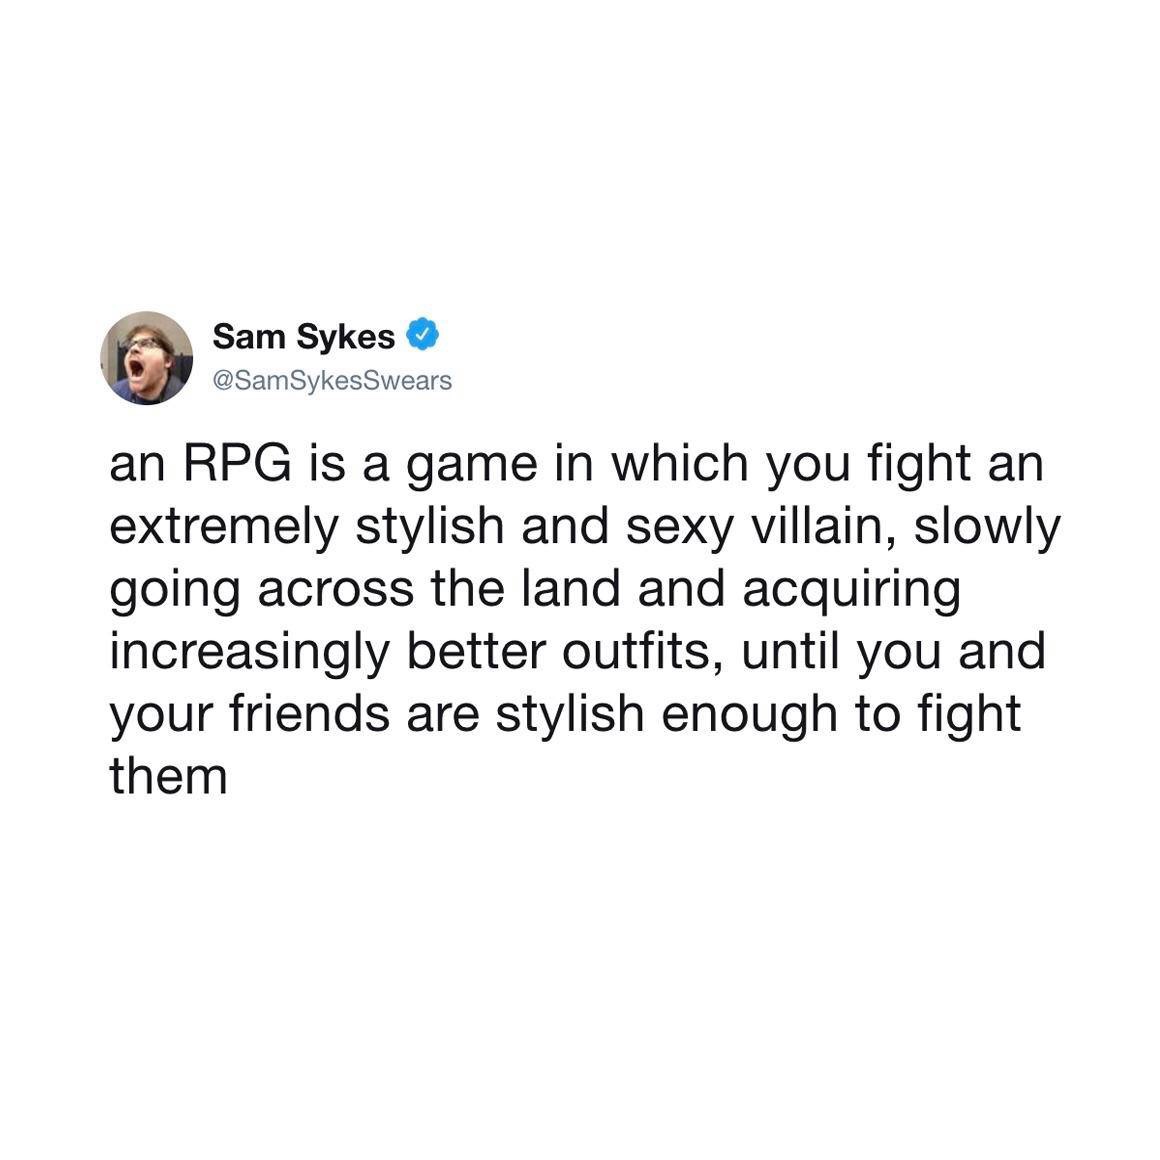 funny gaming memes  - Sam Sykes Swears an Rpg is a game in which you fight an extremely stylish and sexy villain, slowly going across the land and acquiring increasingly better outfits, until you and your friends are stylish enough to fight them